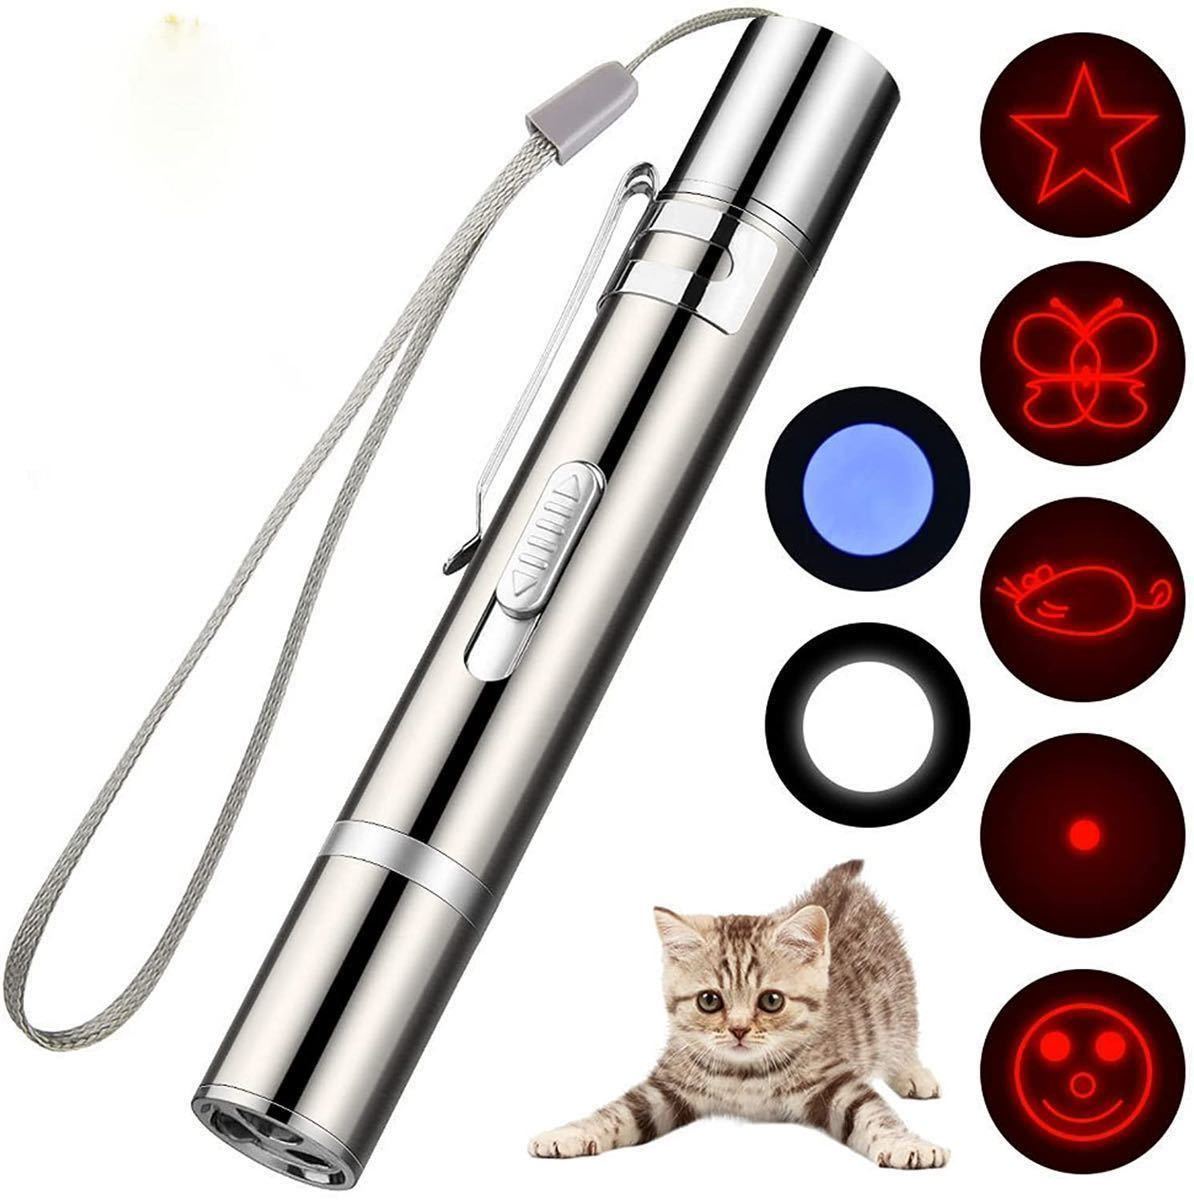  cat toy rechargeable USB motion shortage cancellation toy laser pointer LED light cat .... cat toy -stroke less cancellation 